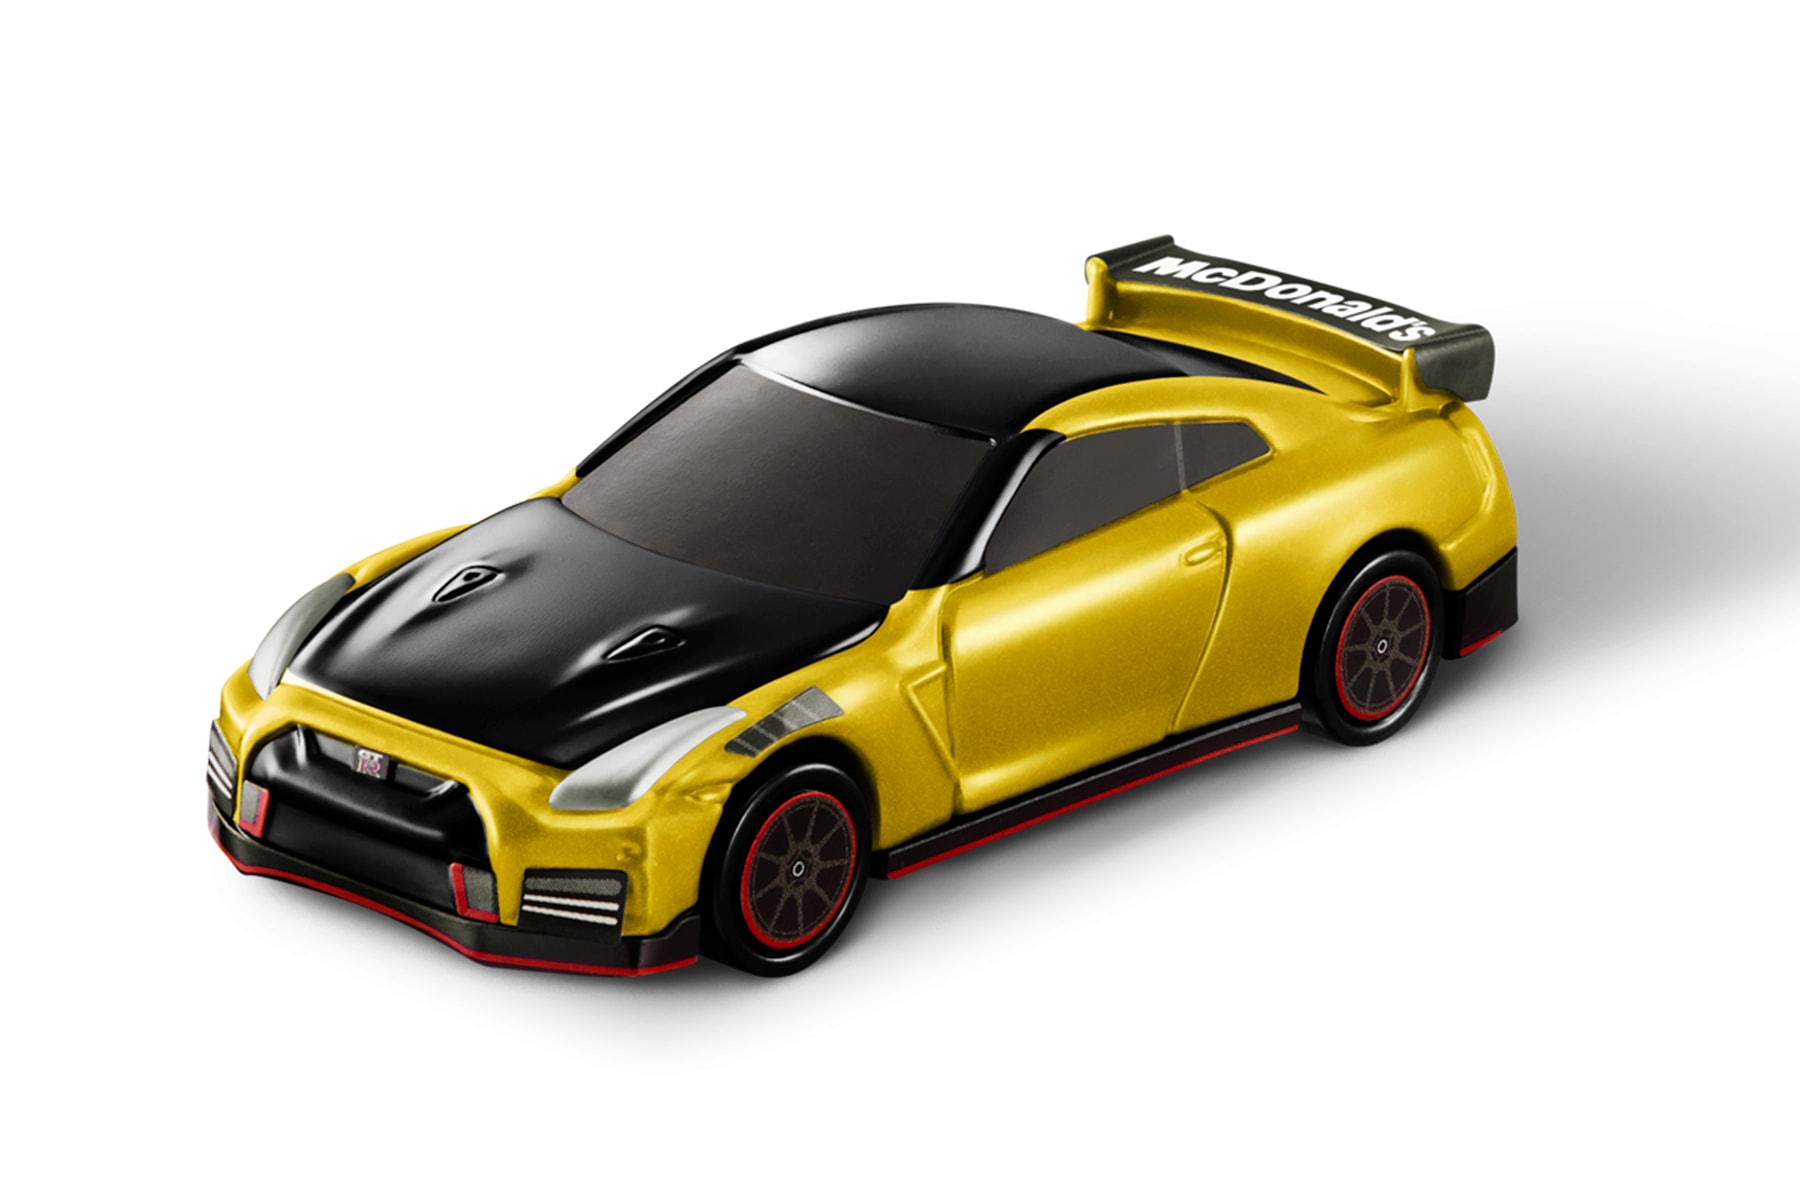 Nissan GT-R NISMO Tomica McDonalds Happy meal Set toy golden arches super cars happy meal Japan toys die-cast cars hot wheels nismo